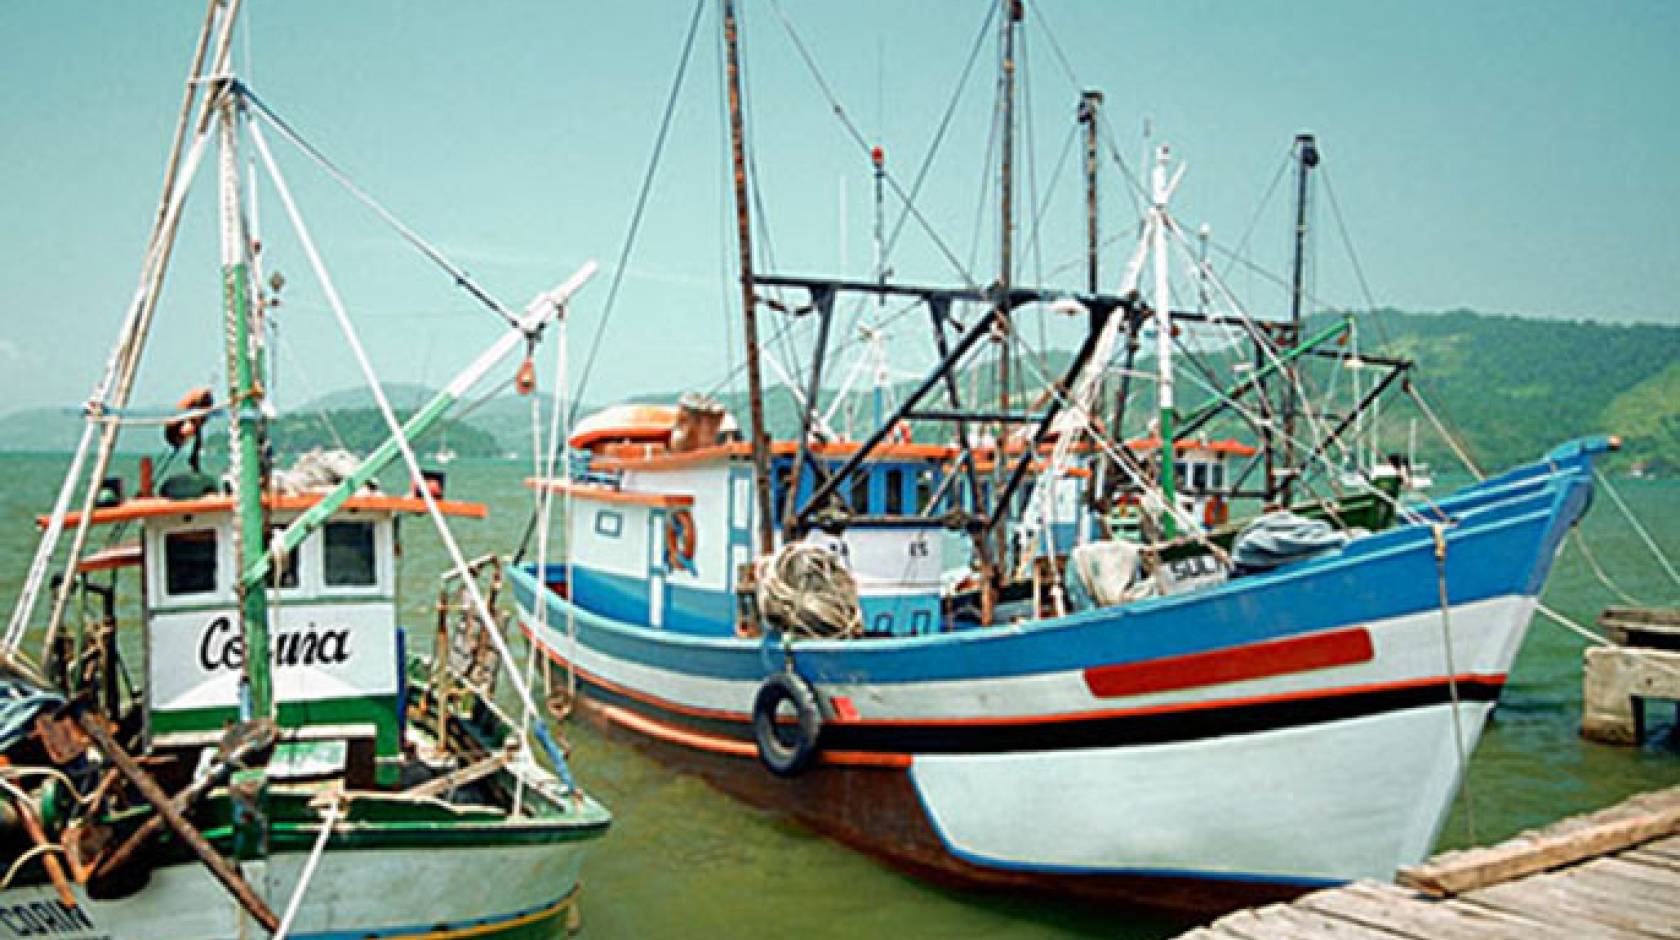 Fisheries need to improve sustainable practices before doing business on global seafood market.